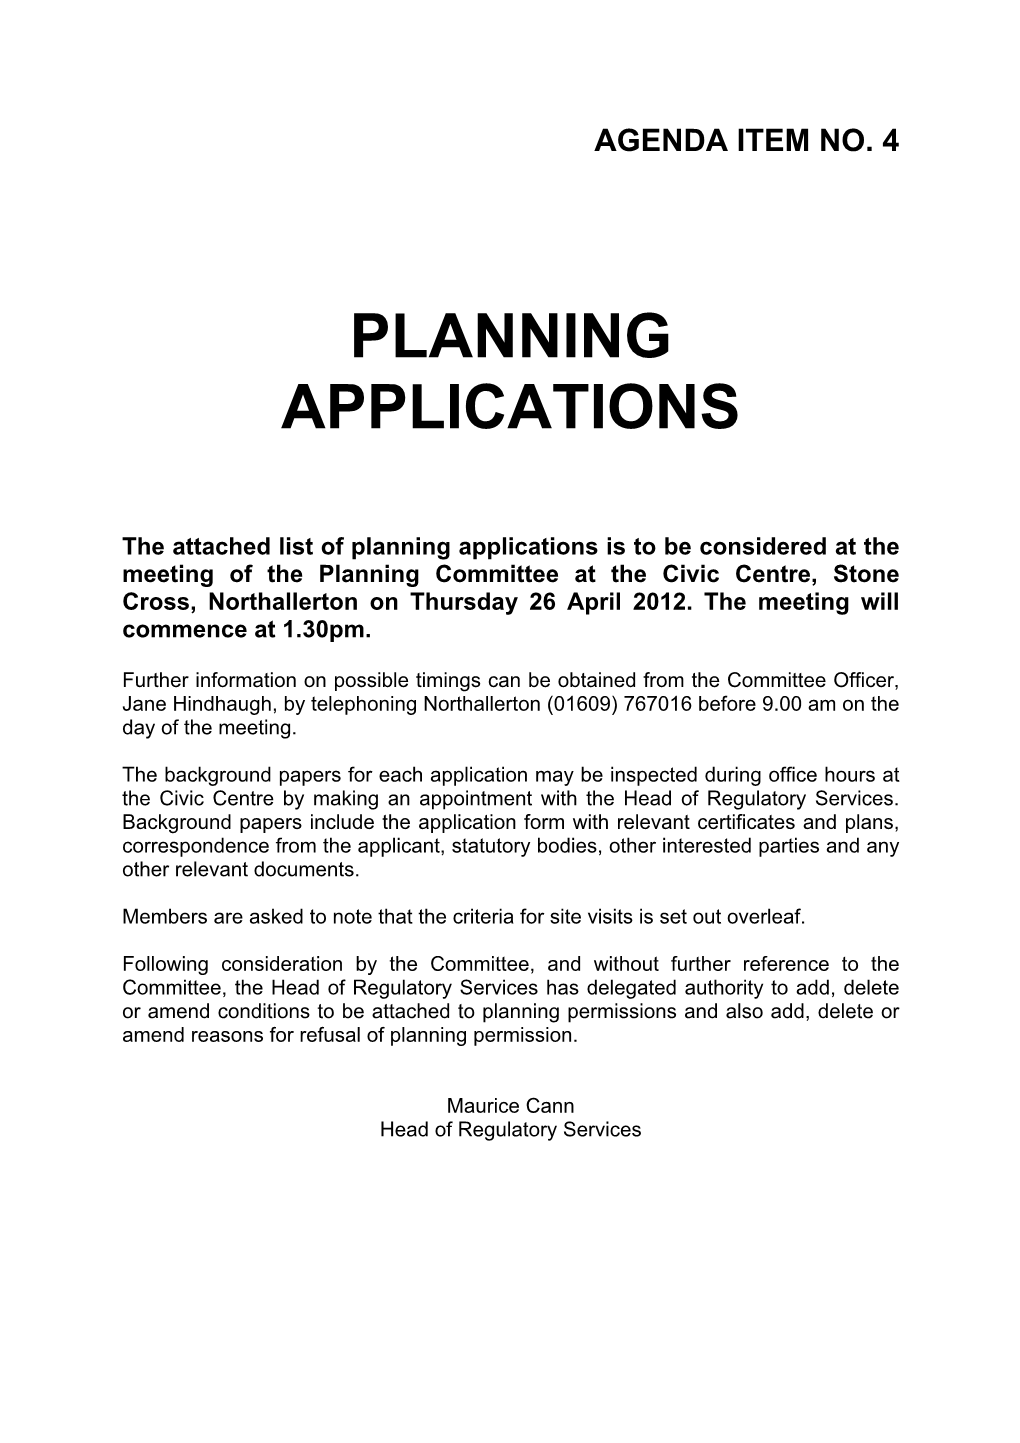 Planning Applications Is to Be Considered at the Meeting of the Planning Committee at the Civic Centre, Stone Cross, Northallerton on Thursday 26 April 2012